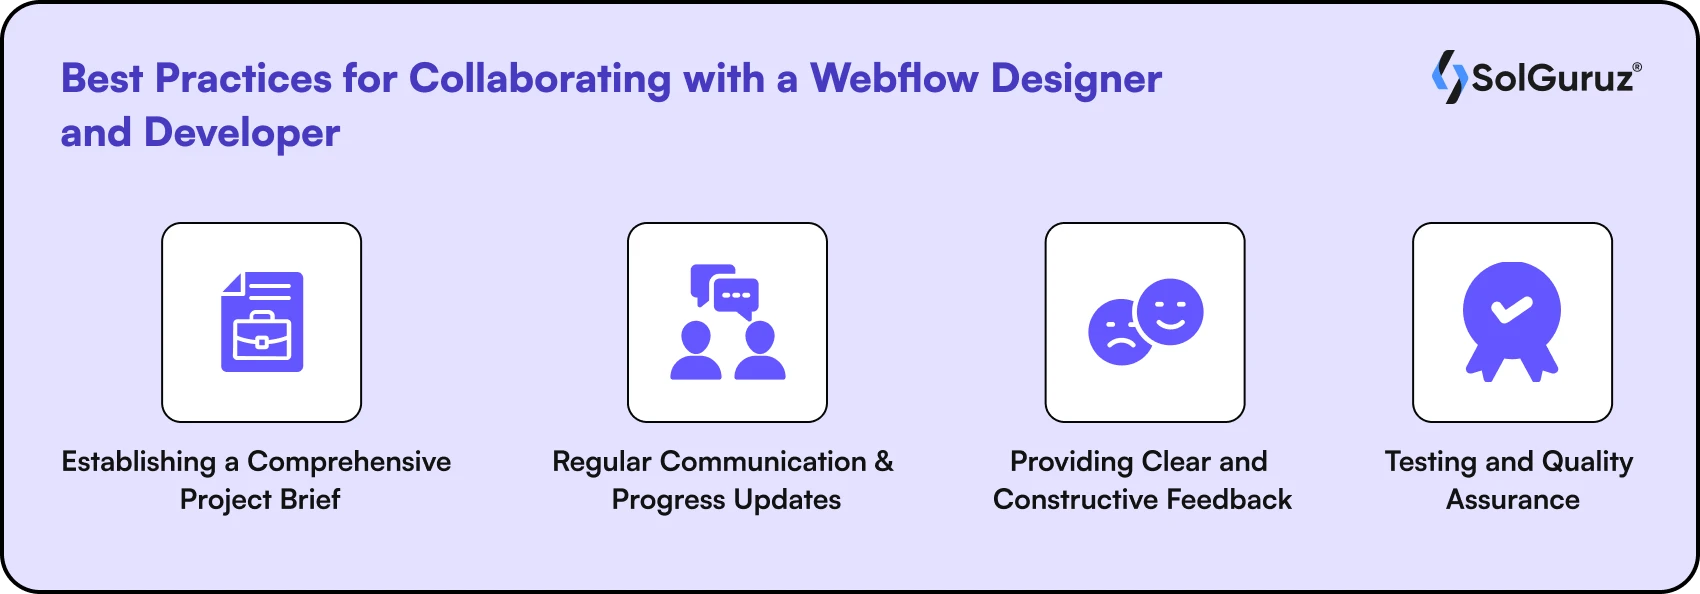 Best Practices for Collaborating with a Webflow Designer and Developer